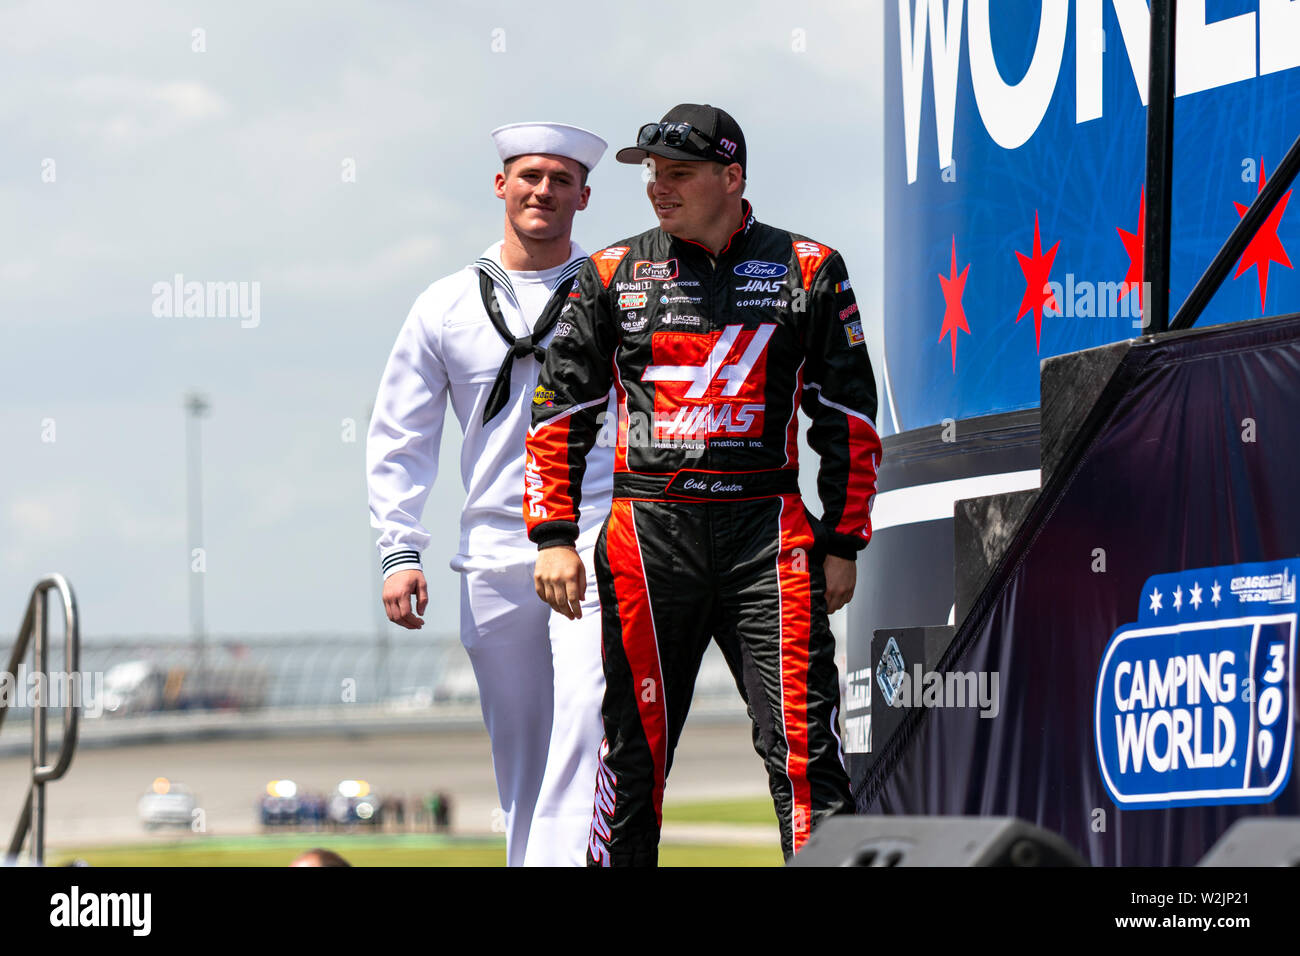 Joliet, IL, United States - June 29, 2019: Cole Custer being introduced before NASCAR XFinity Series Camping World 300 race. Stock Photo